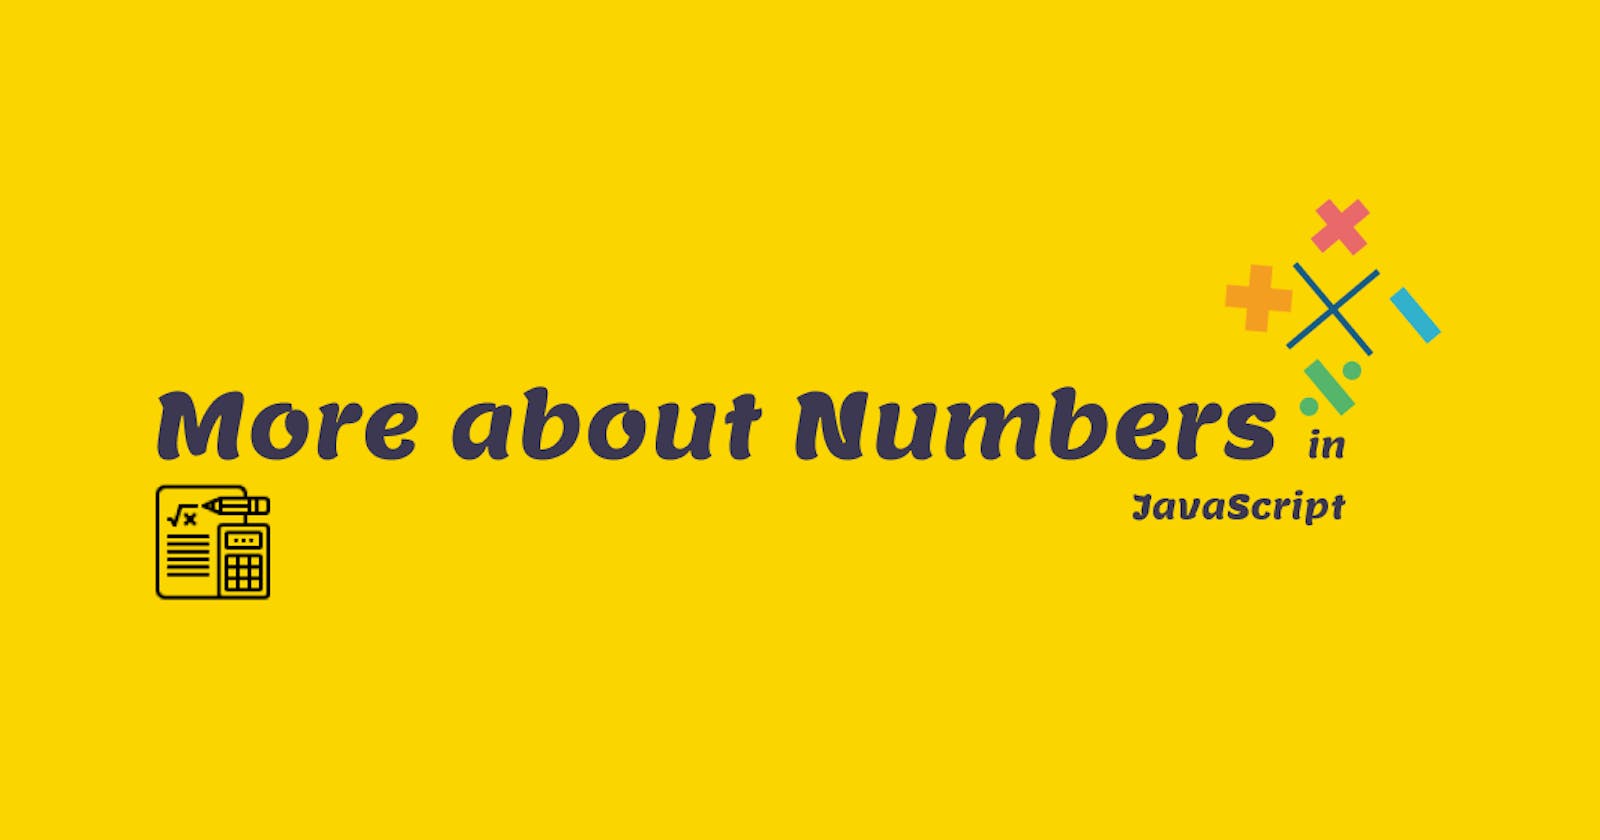 More about Numbers in JavaScript